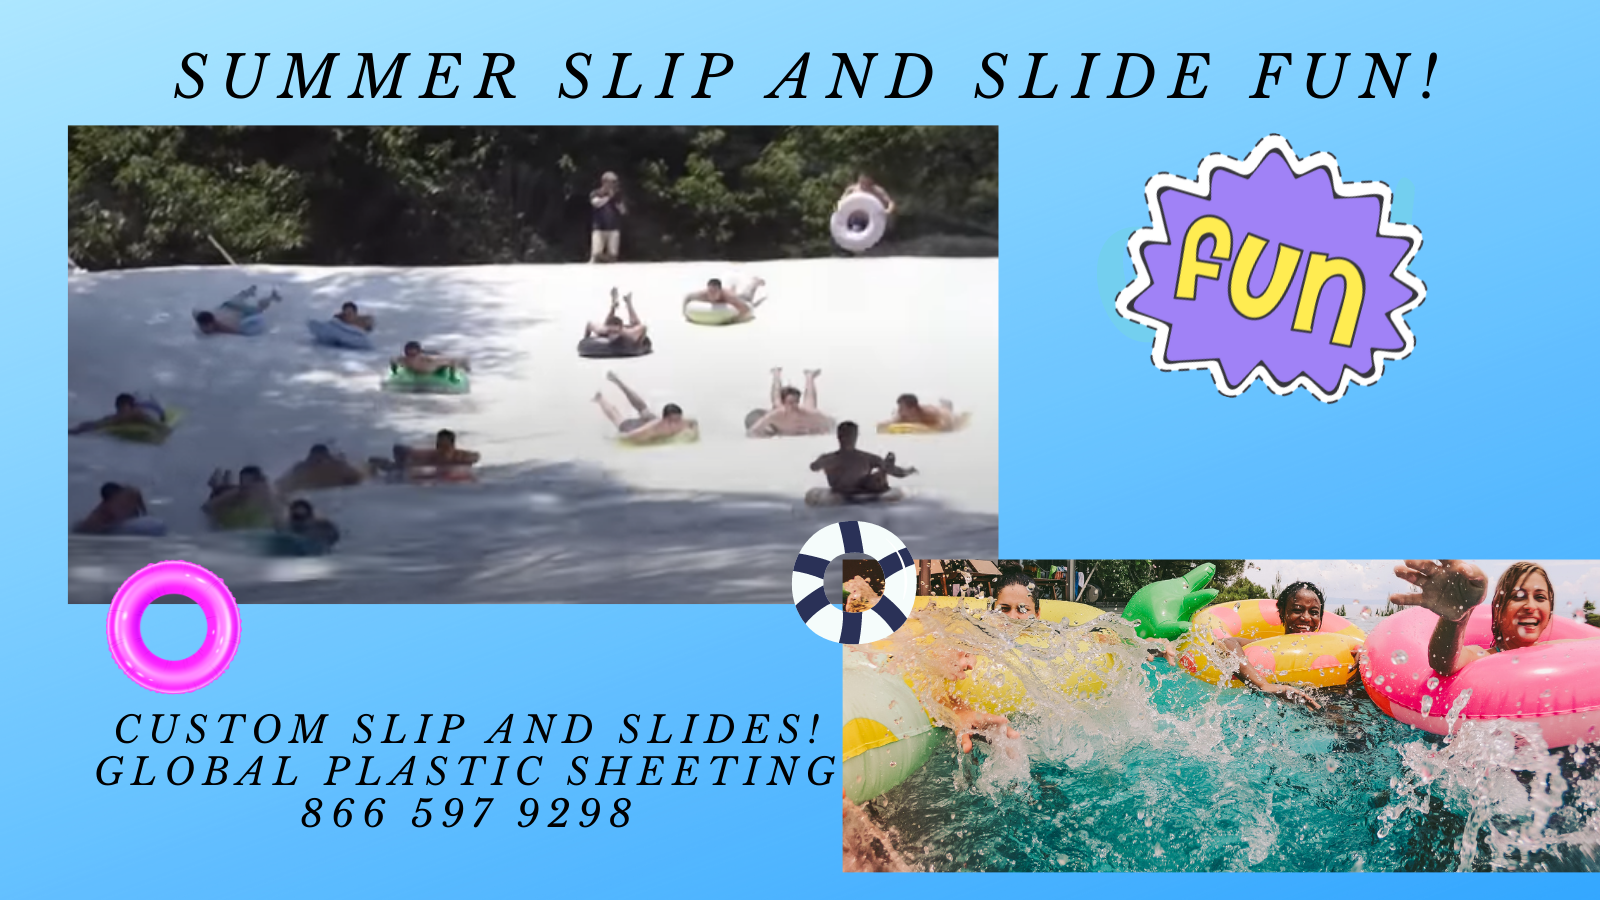 Are you ready for FUN! Call GPS 866 597 9298 for your custom slip and slide